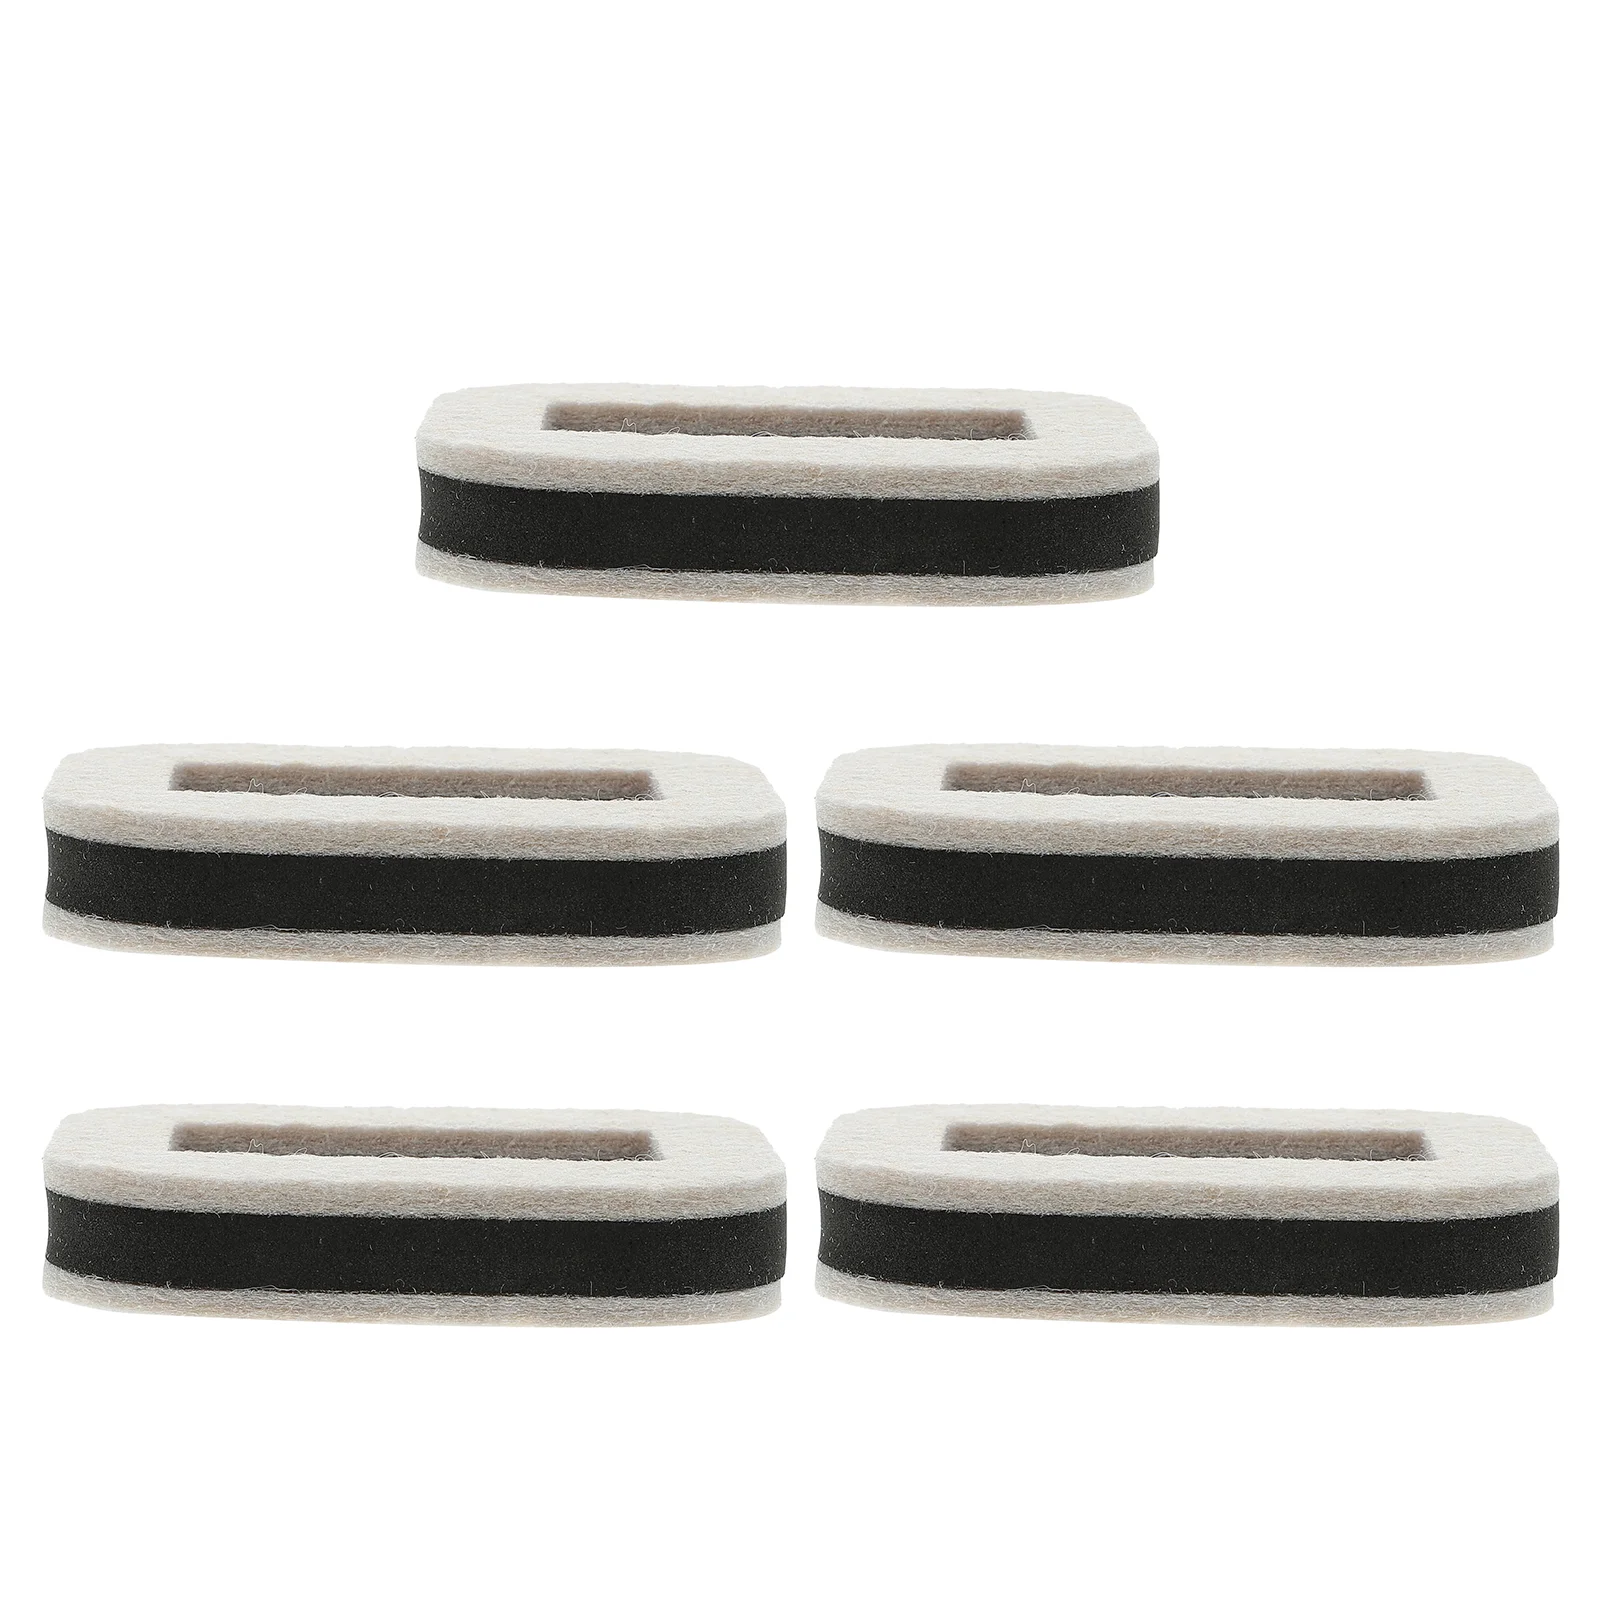 

Bed Stoppers Felt Furniture Pads Furniture Caster Stopper Stoppers Caster Cups Chair Feet Floor Protectors Felt Pads Bottom